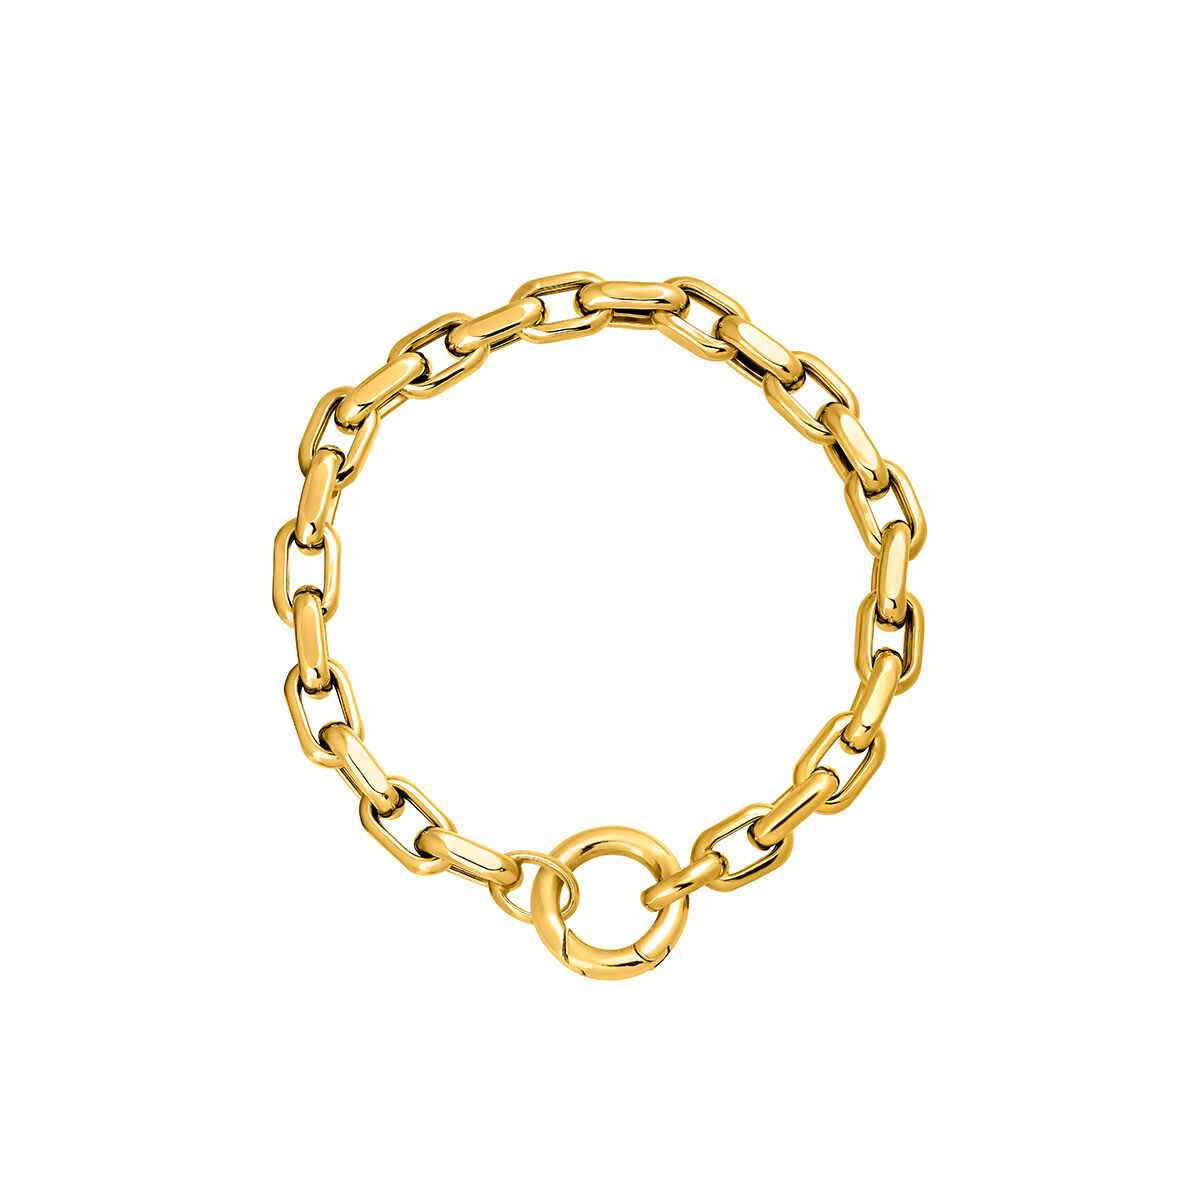 Cable link bracelet in 18k yellow gold-plated silver, J05336-02-17, hi-res